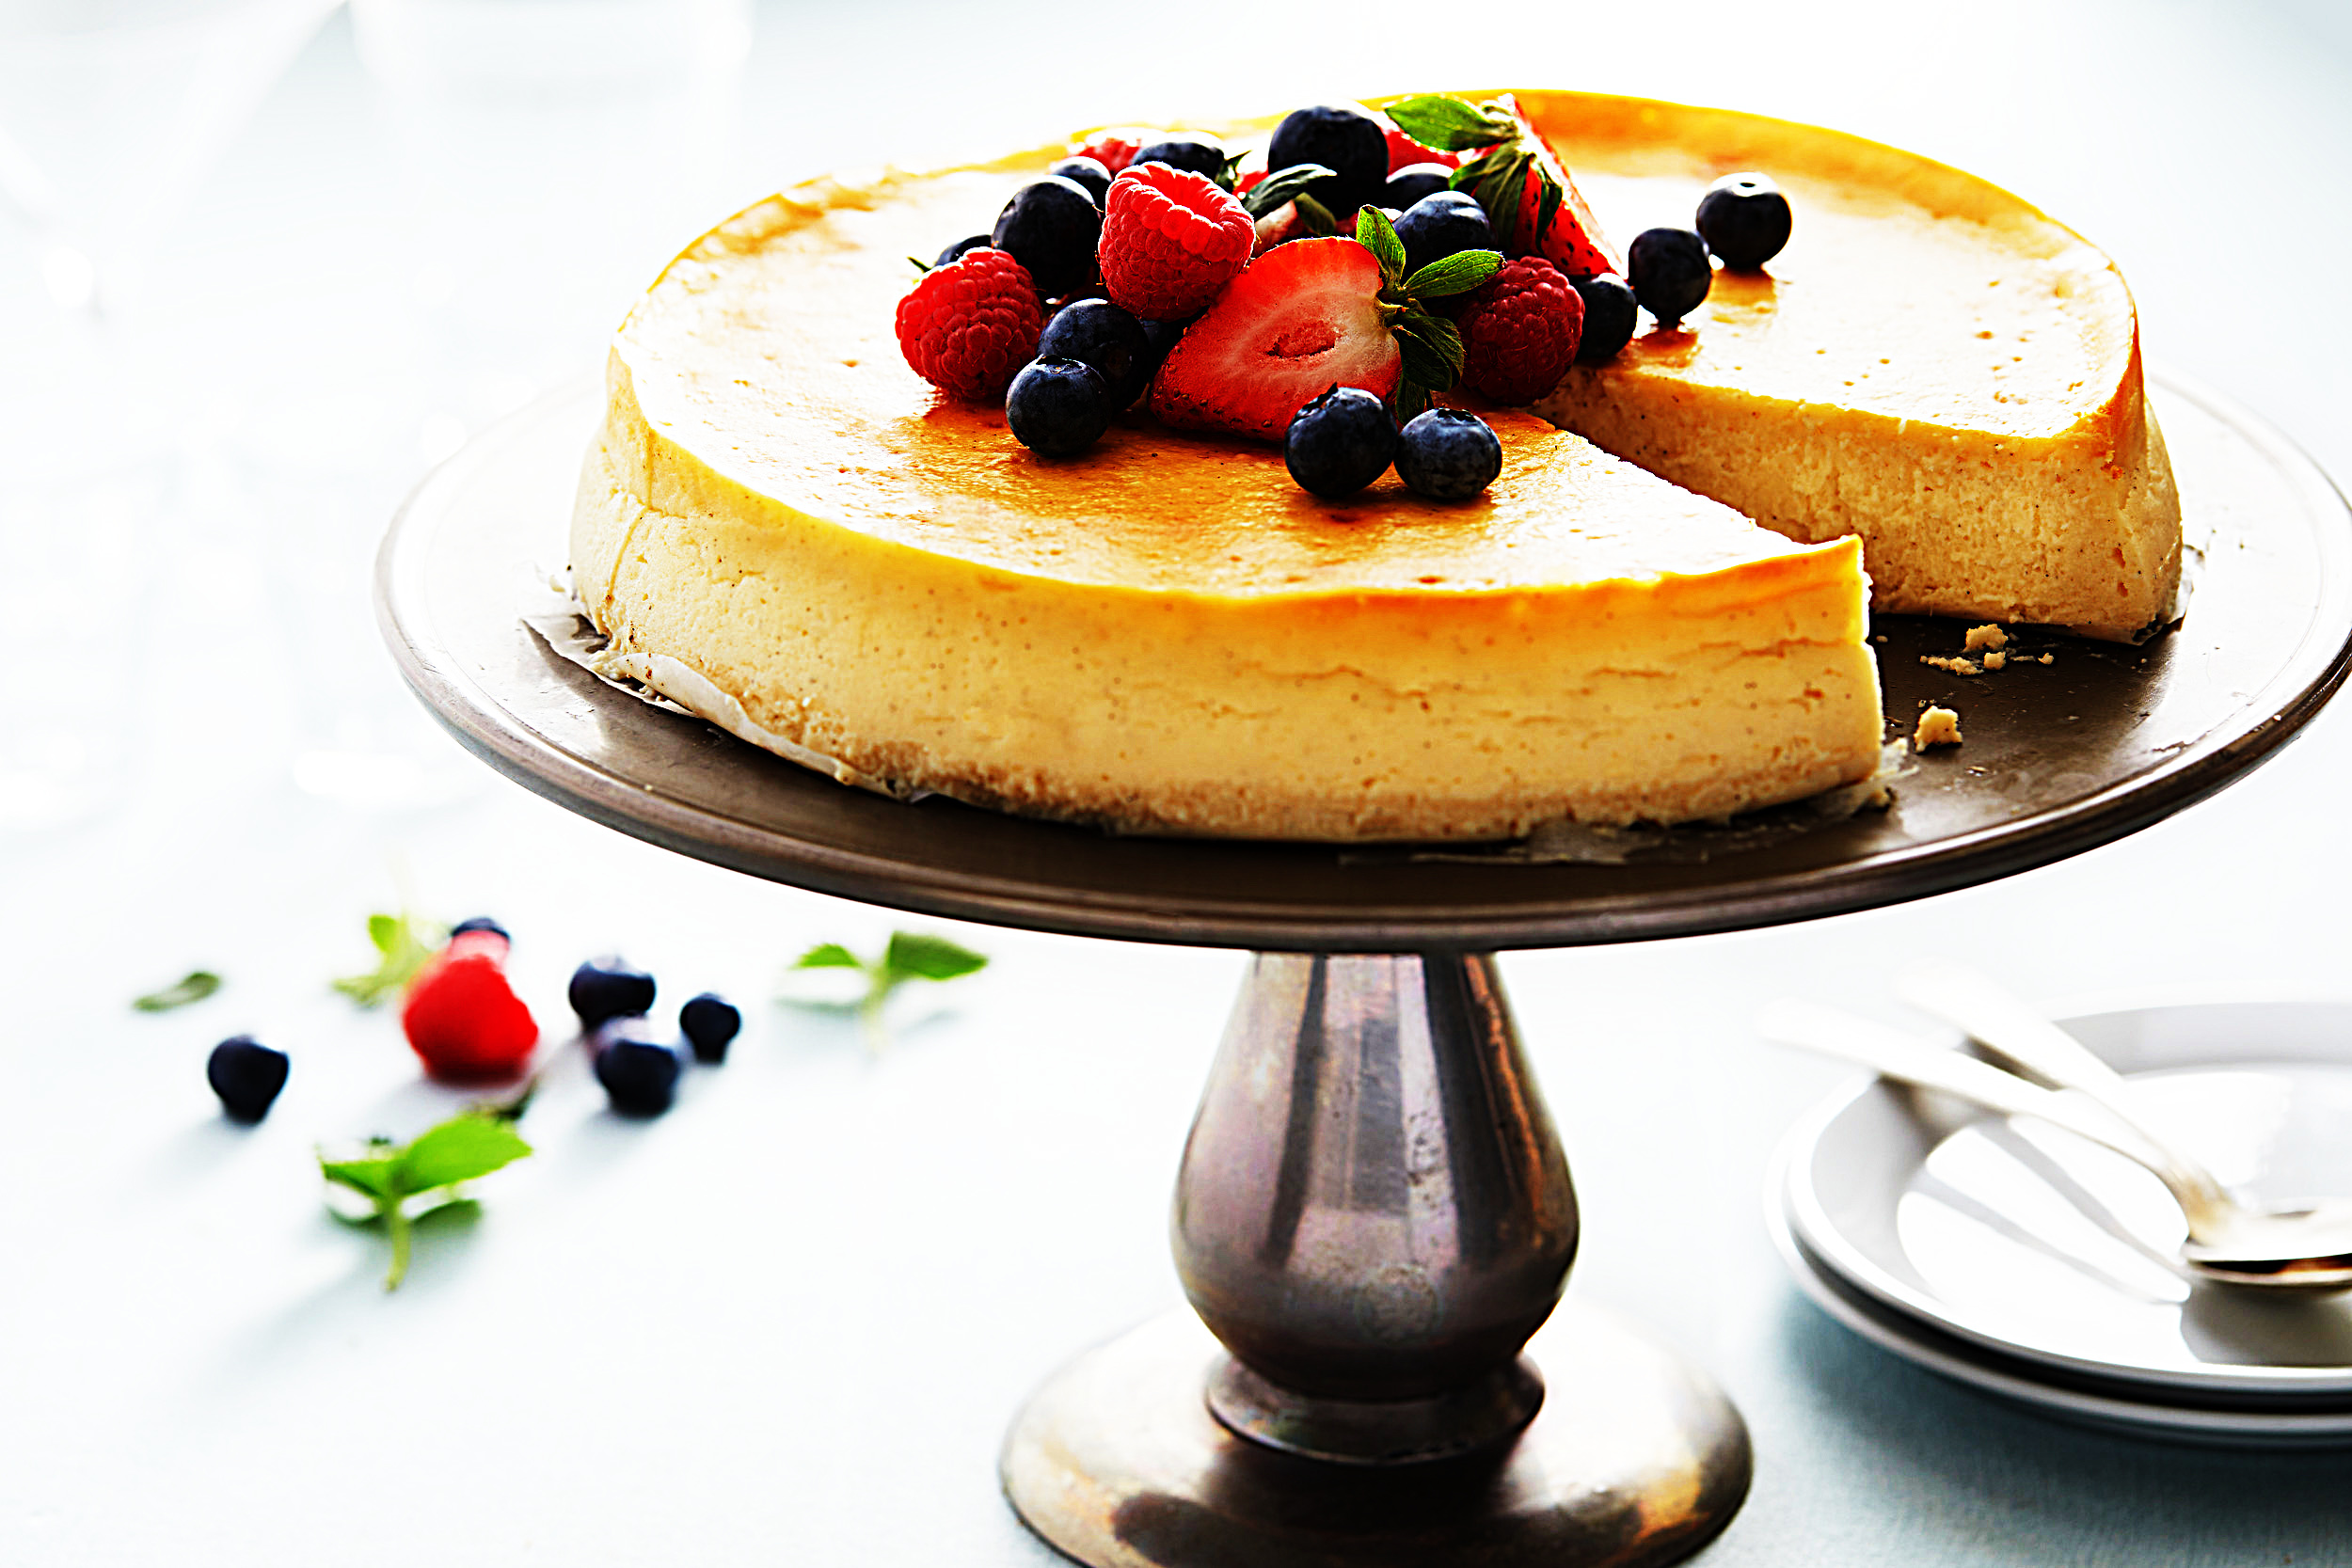 Stupid-Easy Recipe for 5-Ingredient Crustless Cheesecake (#1 Top-Rated)